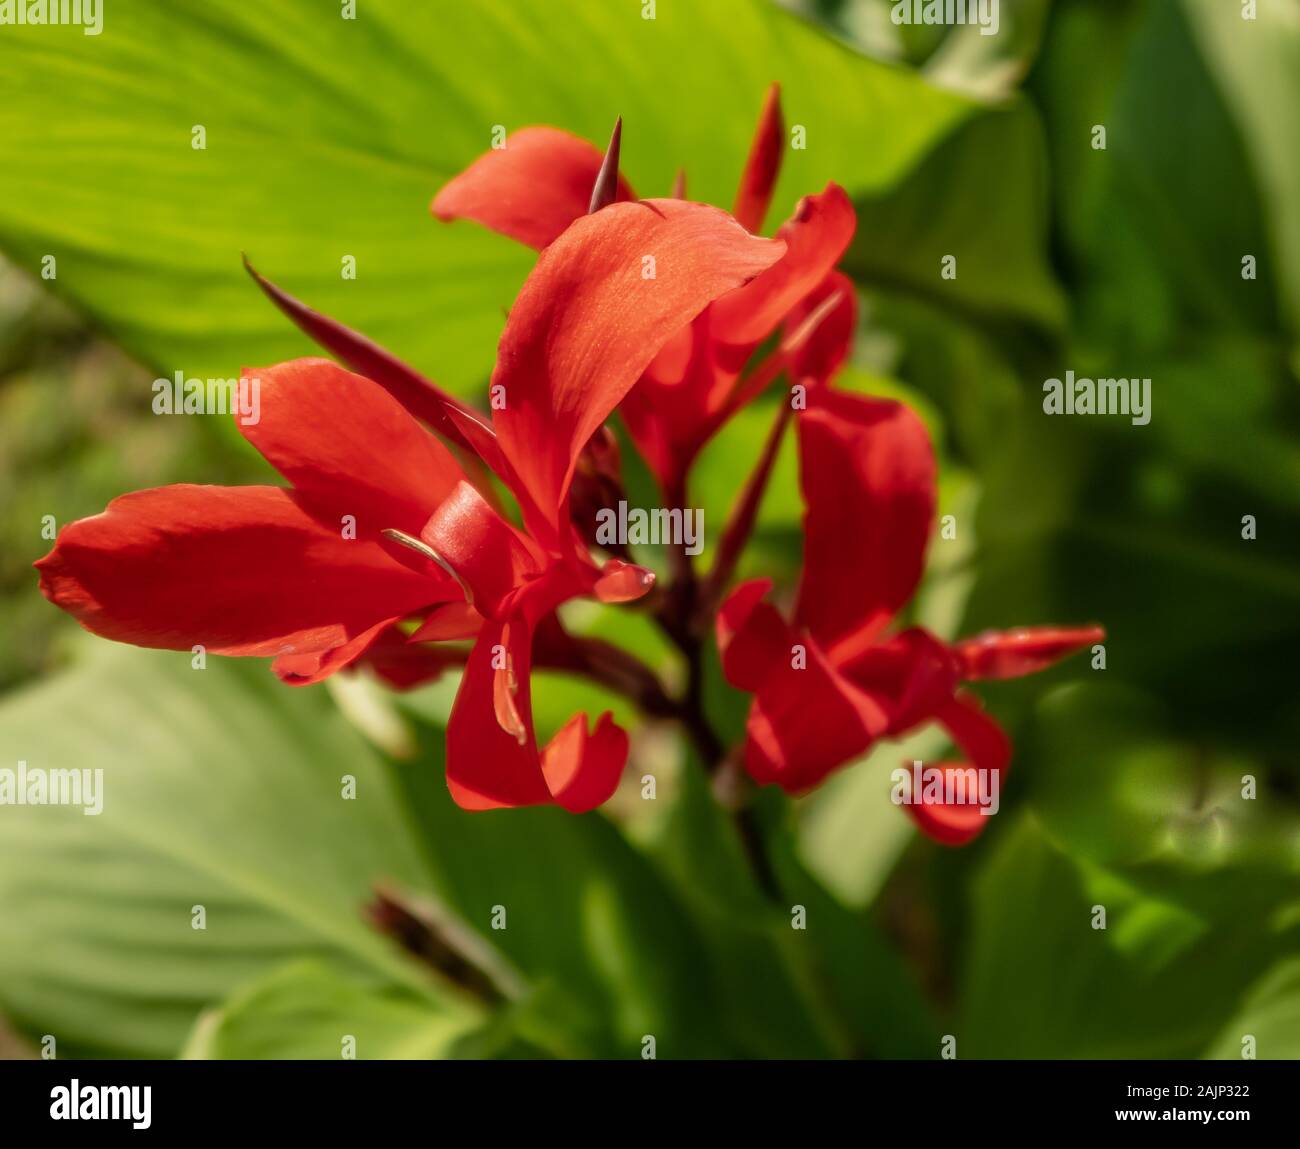 Red flower in a sunny garden Stock Photo